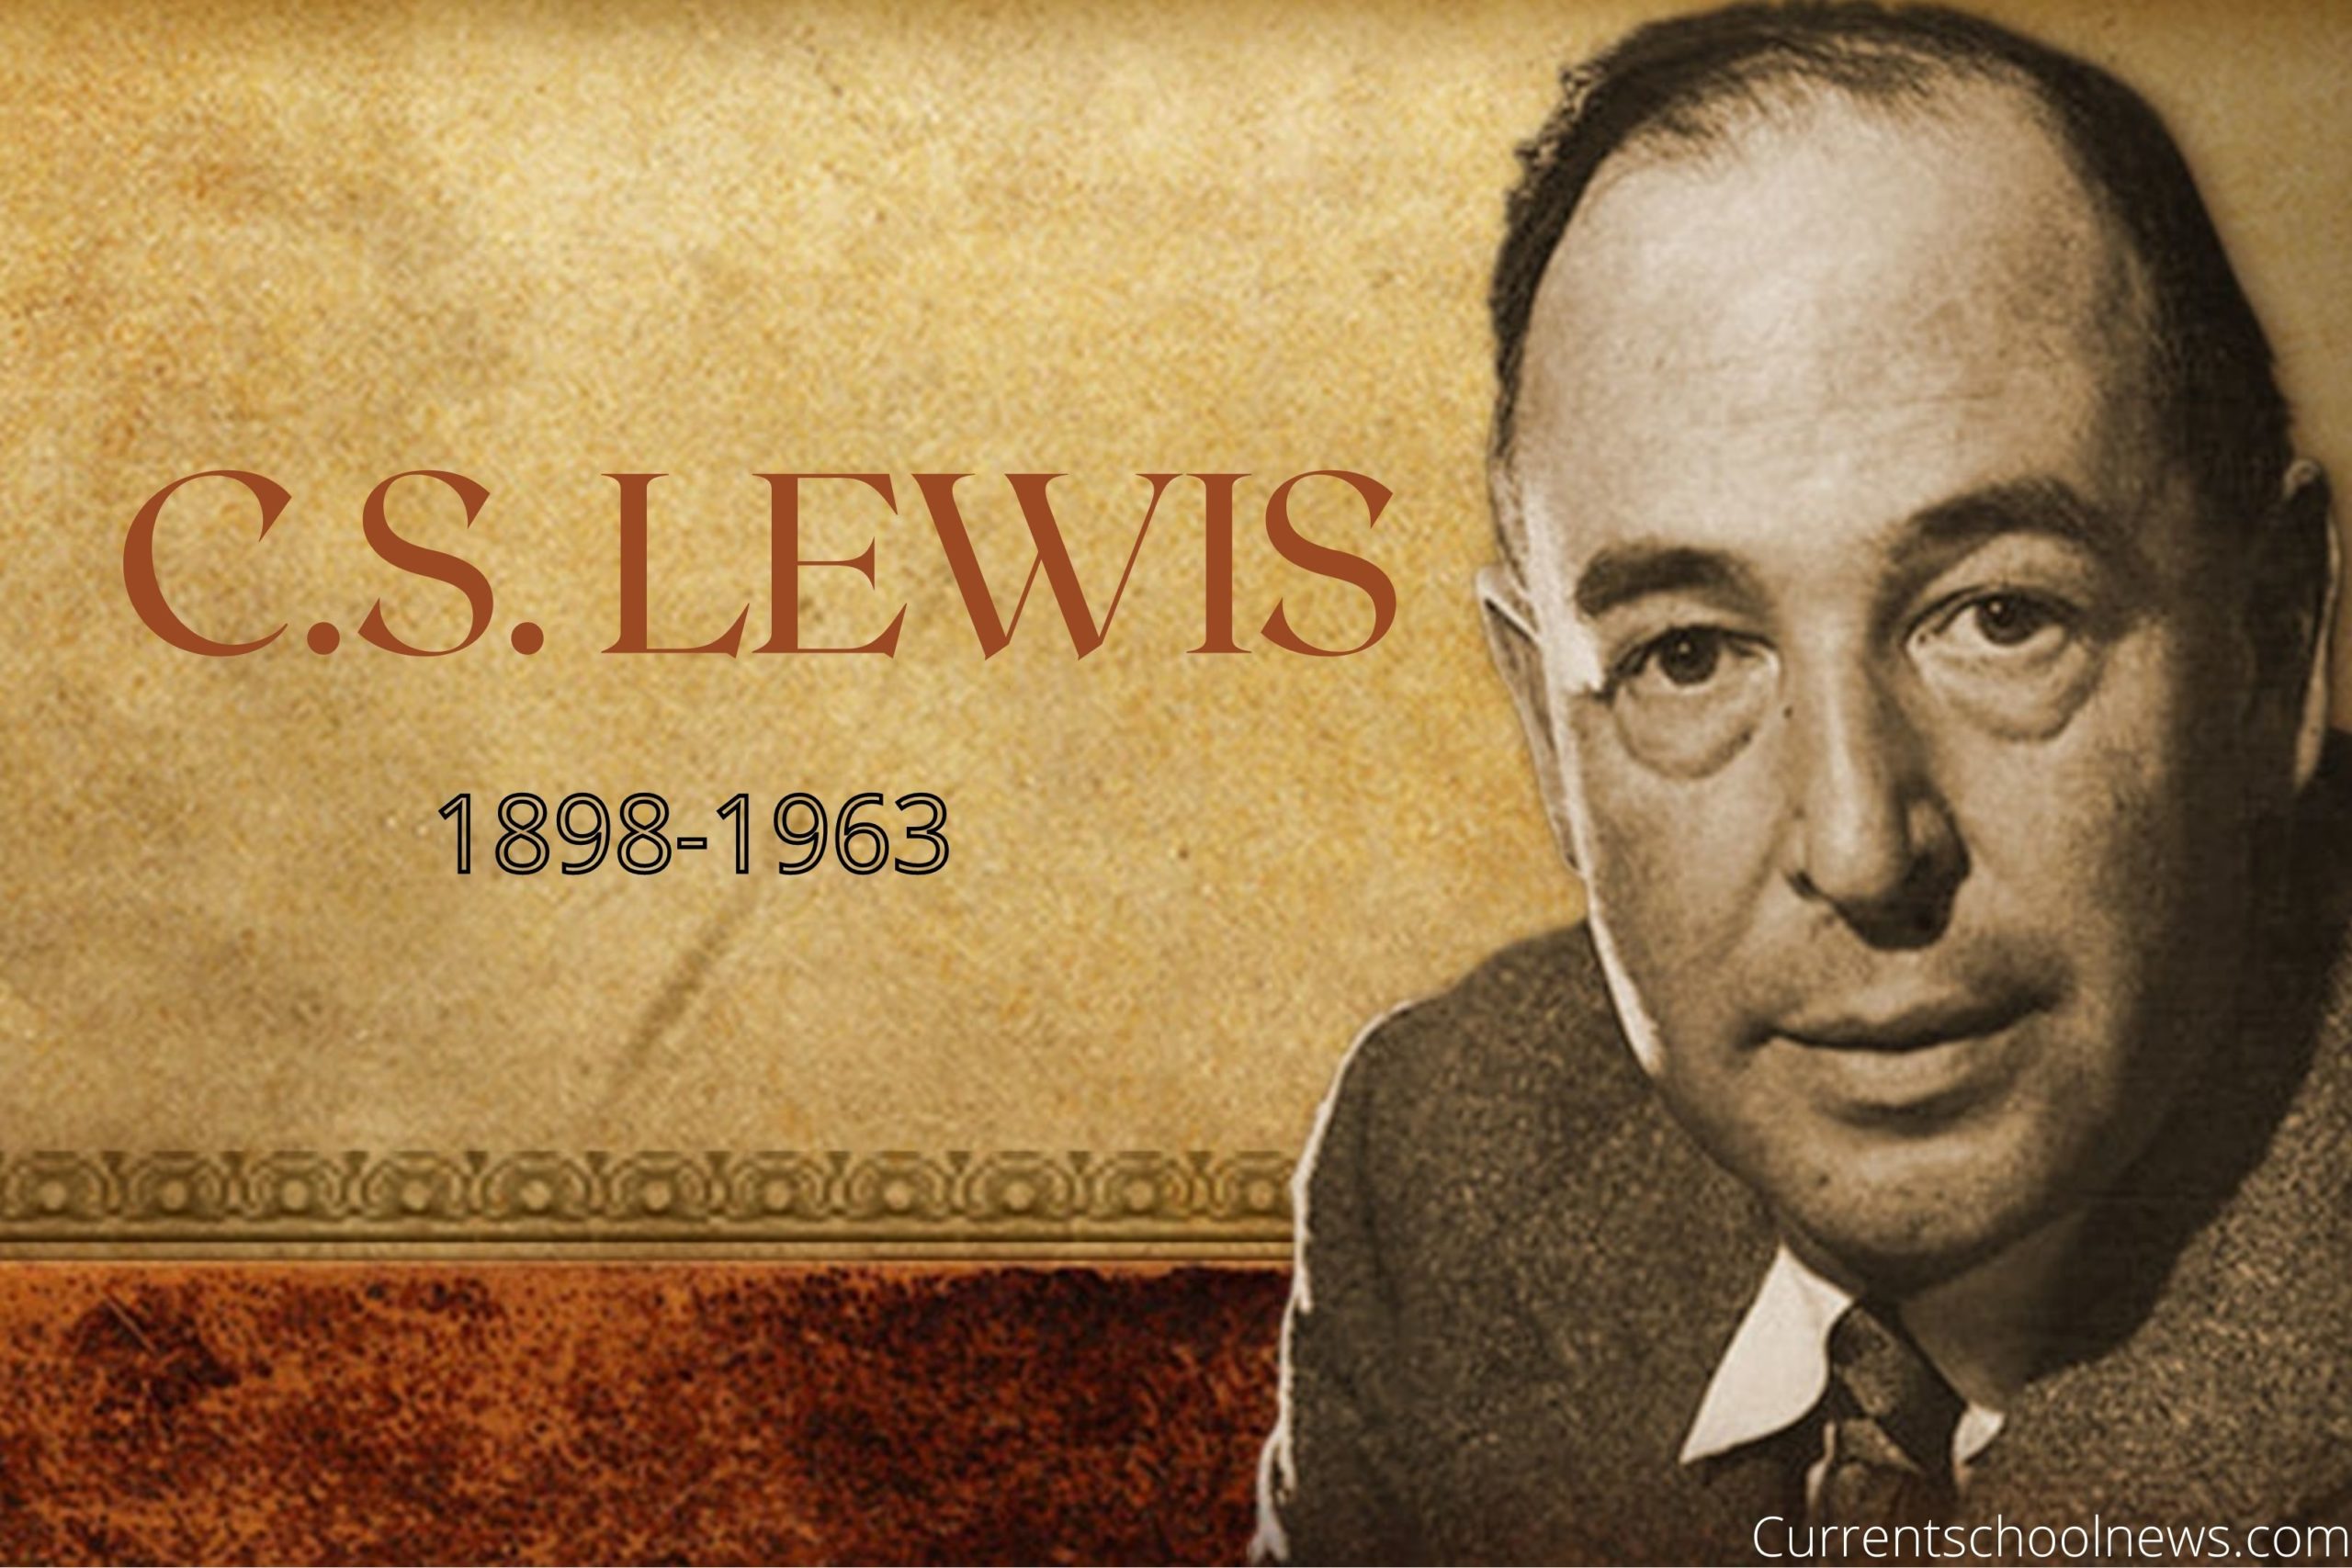 About CS Lewis 